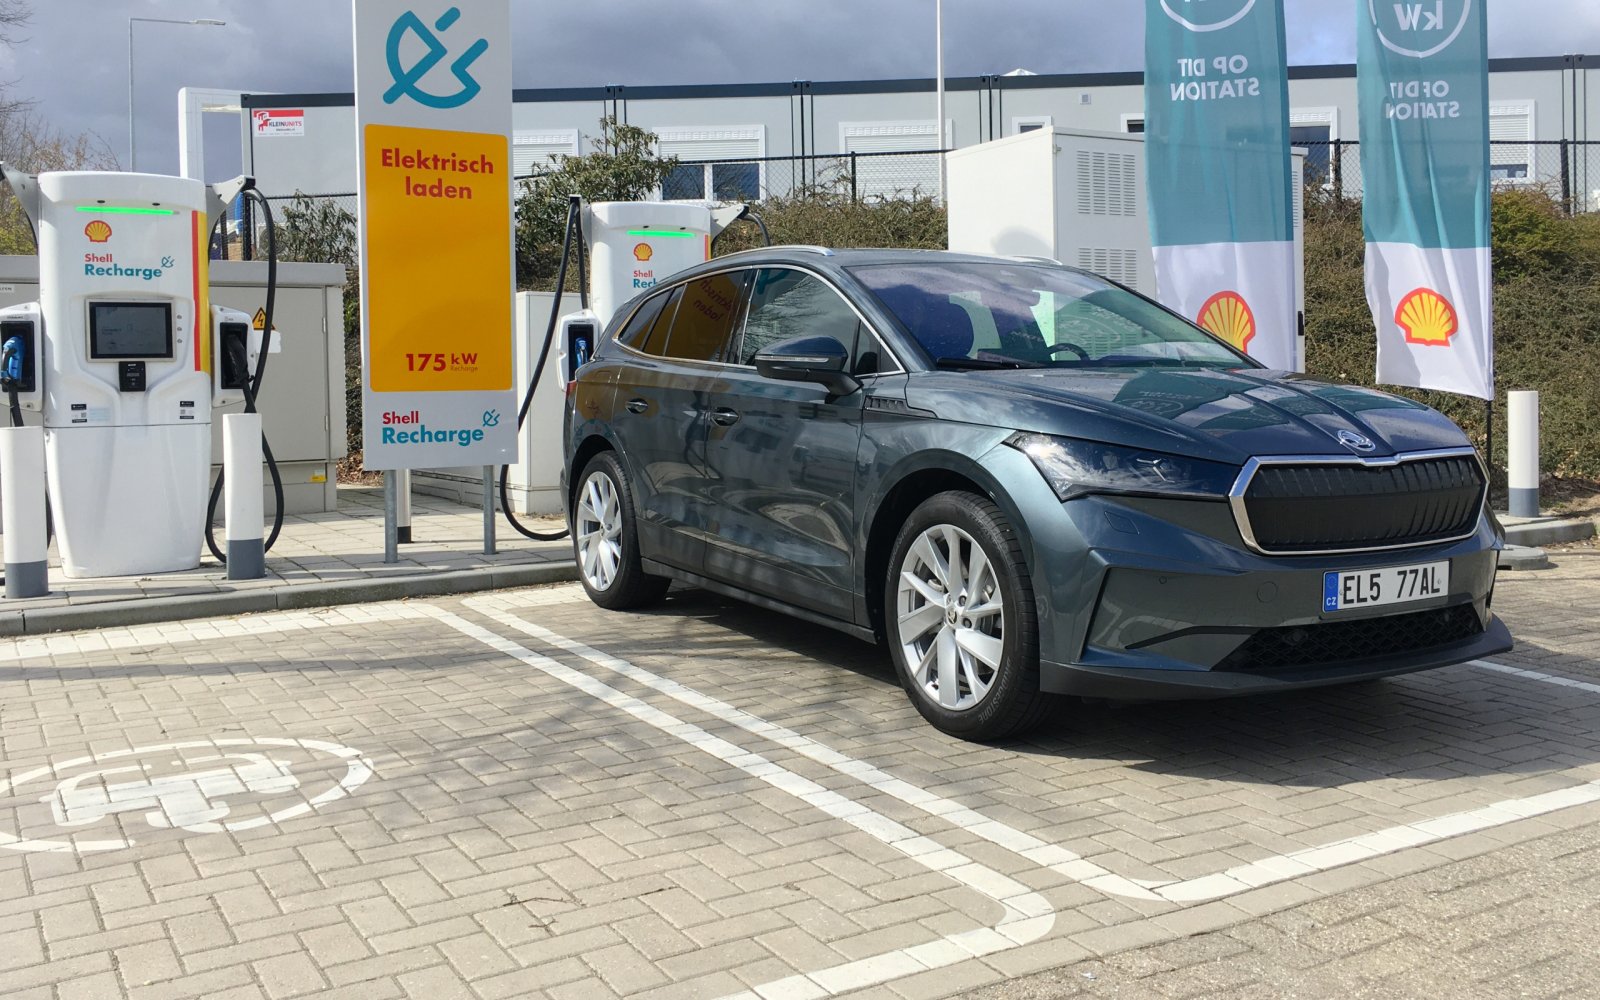 Range test Top 21 - These electric cars have the longest range